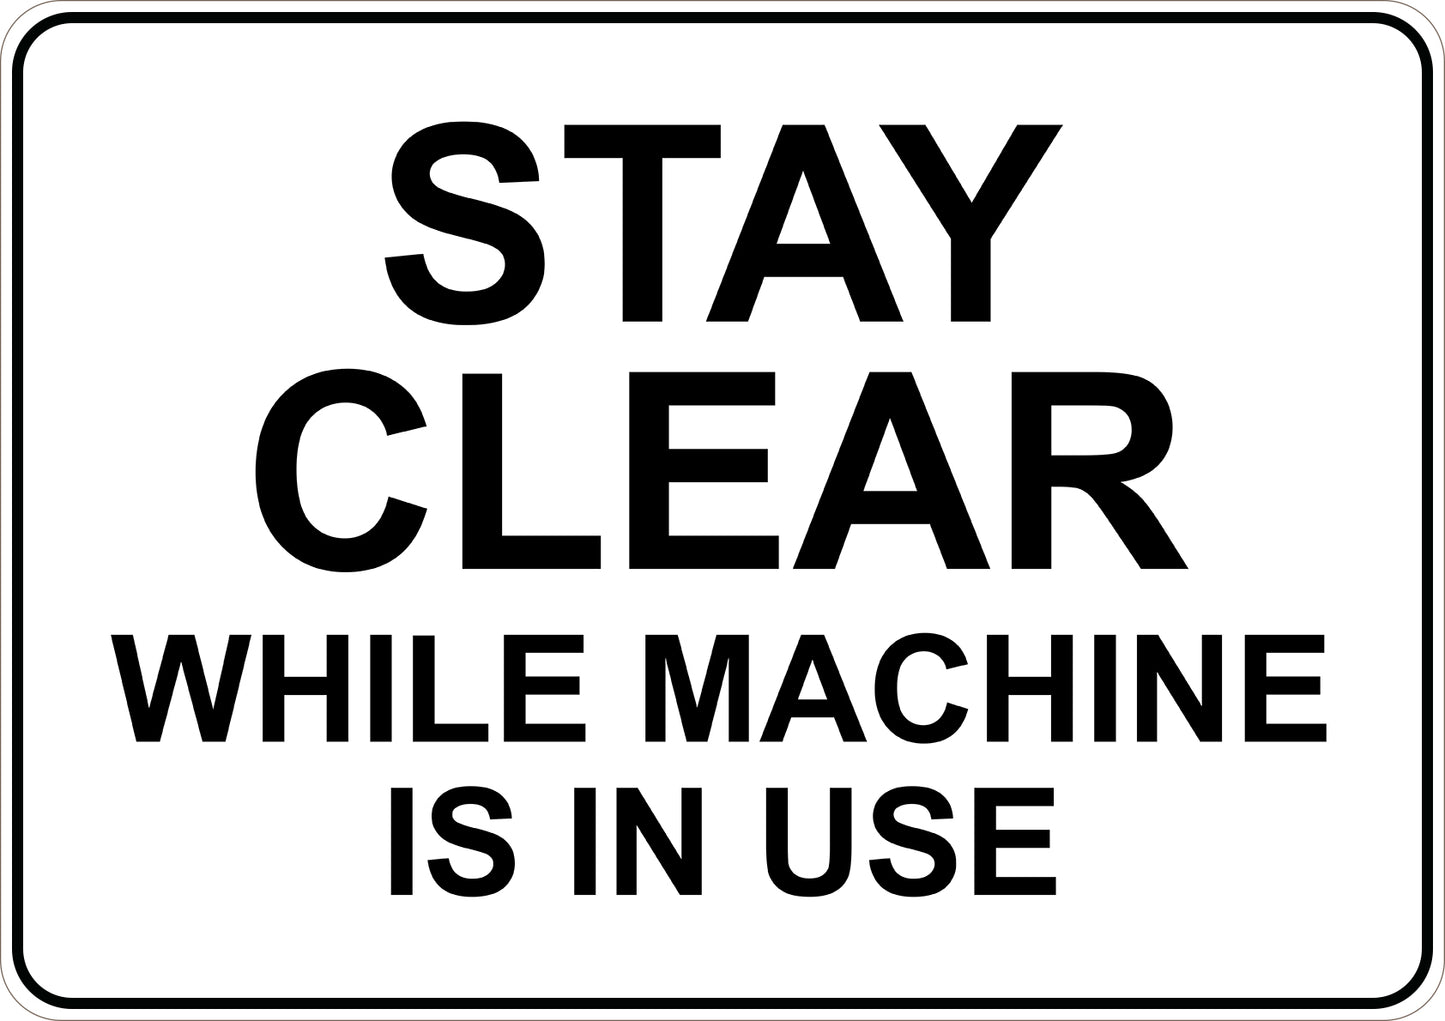 Stay Clear While Machine Is In Use Printed Sign